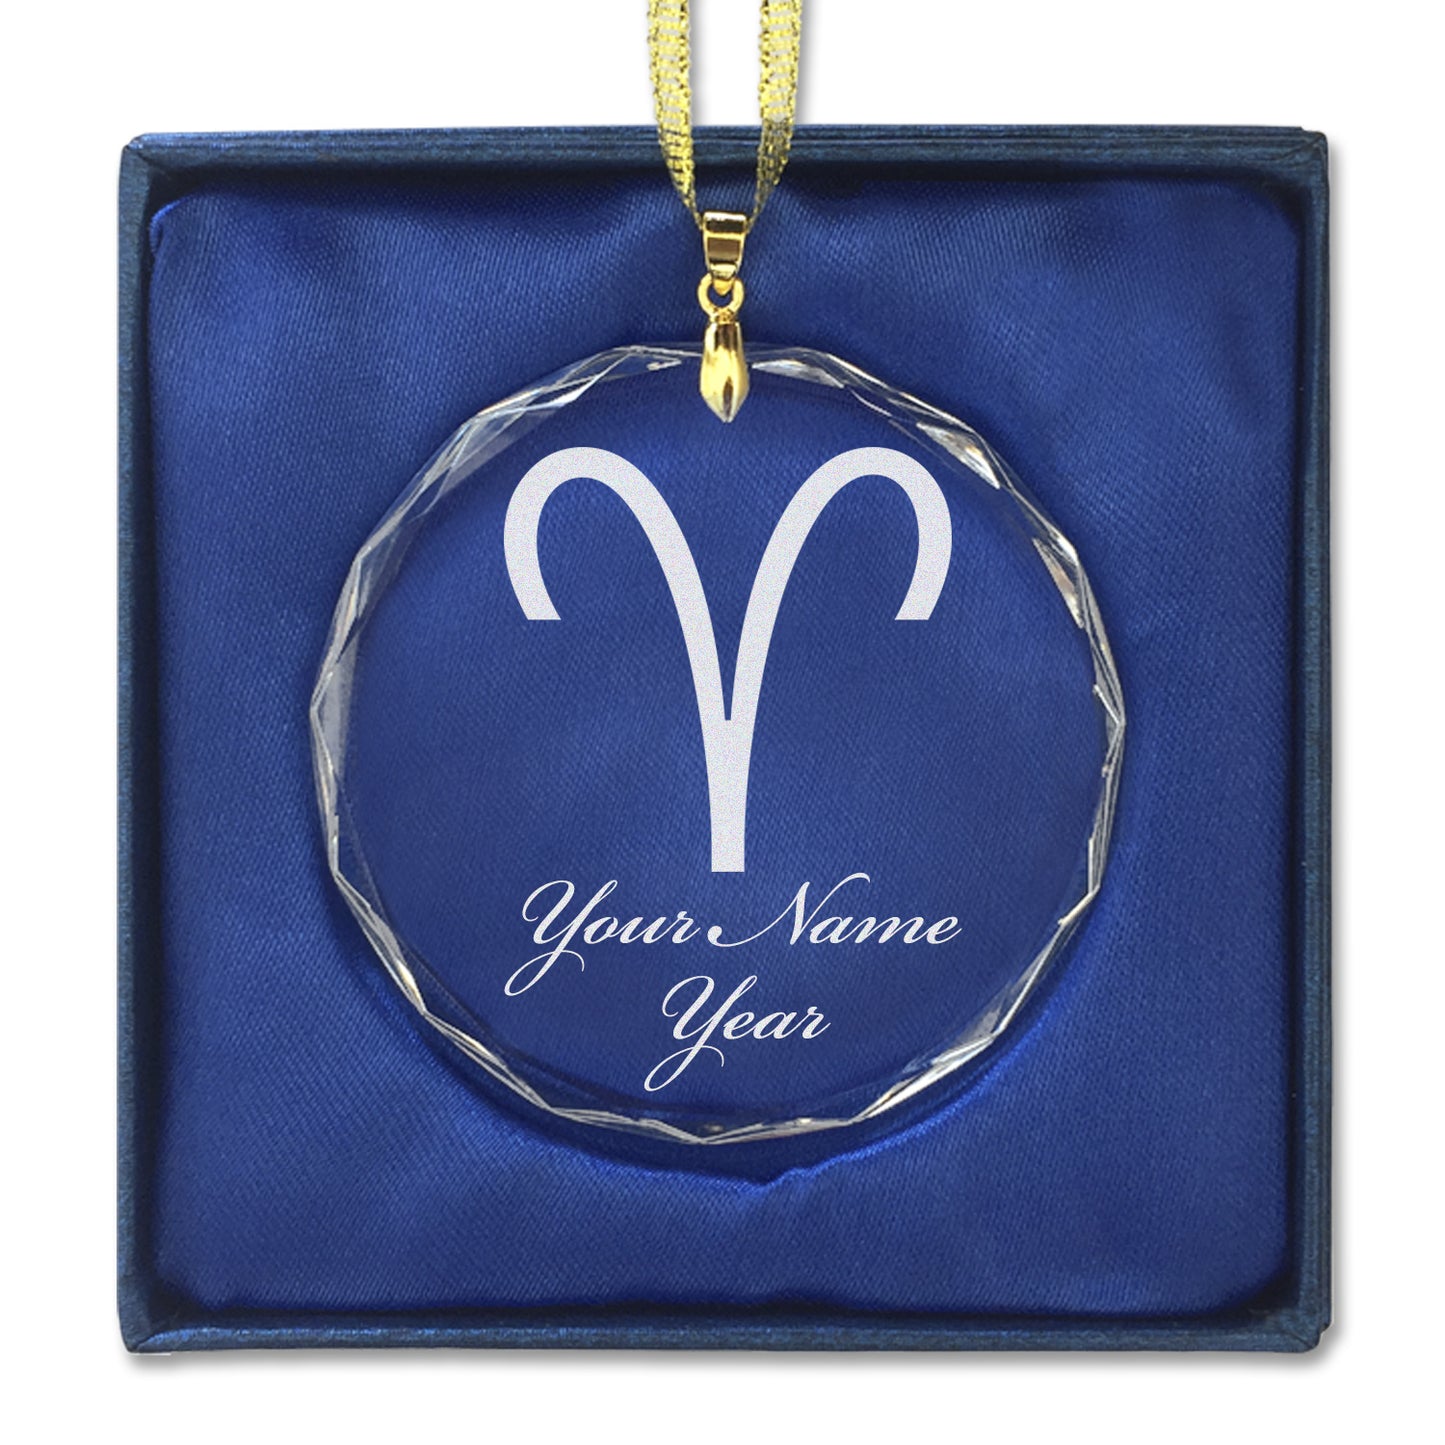 LaserGram Christmas Ornament, Zodiac Sign Aries, Personalized Engraving Included (Round Shape)